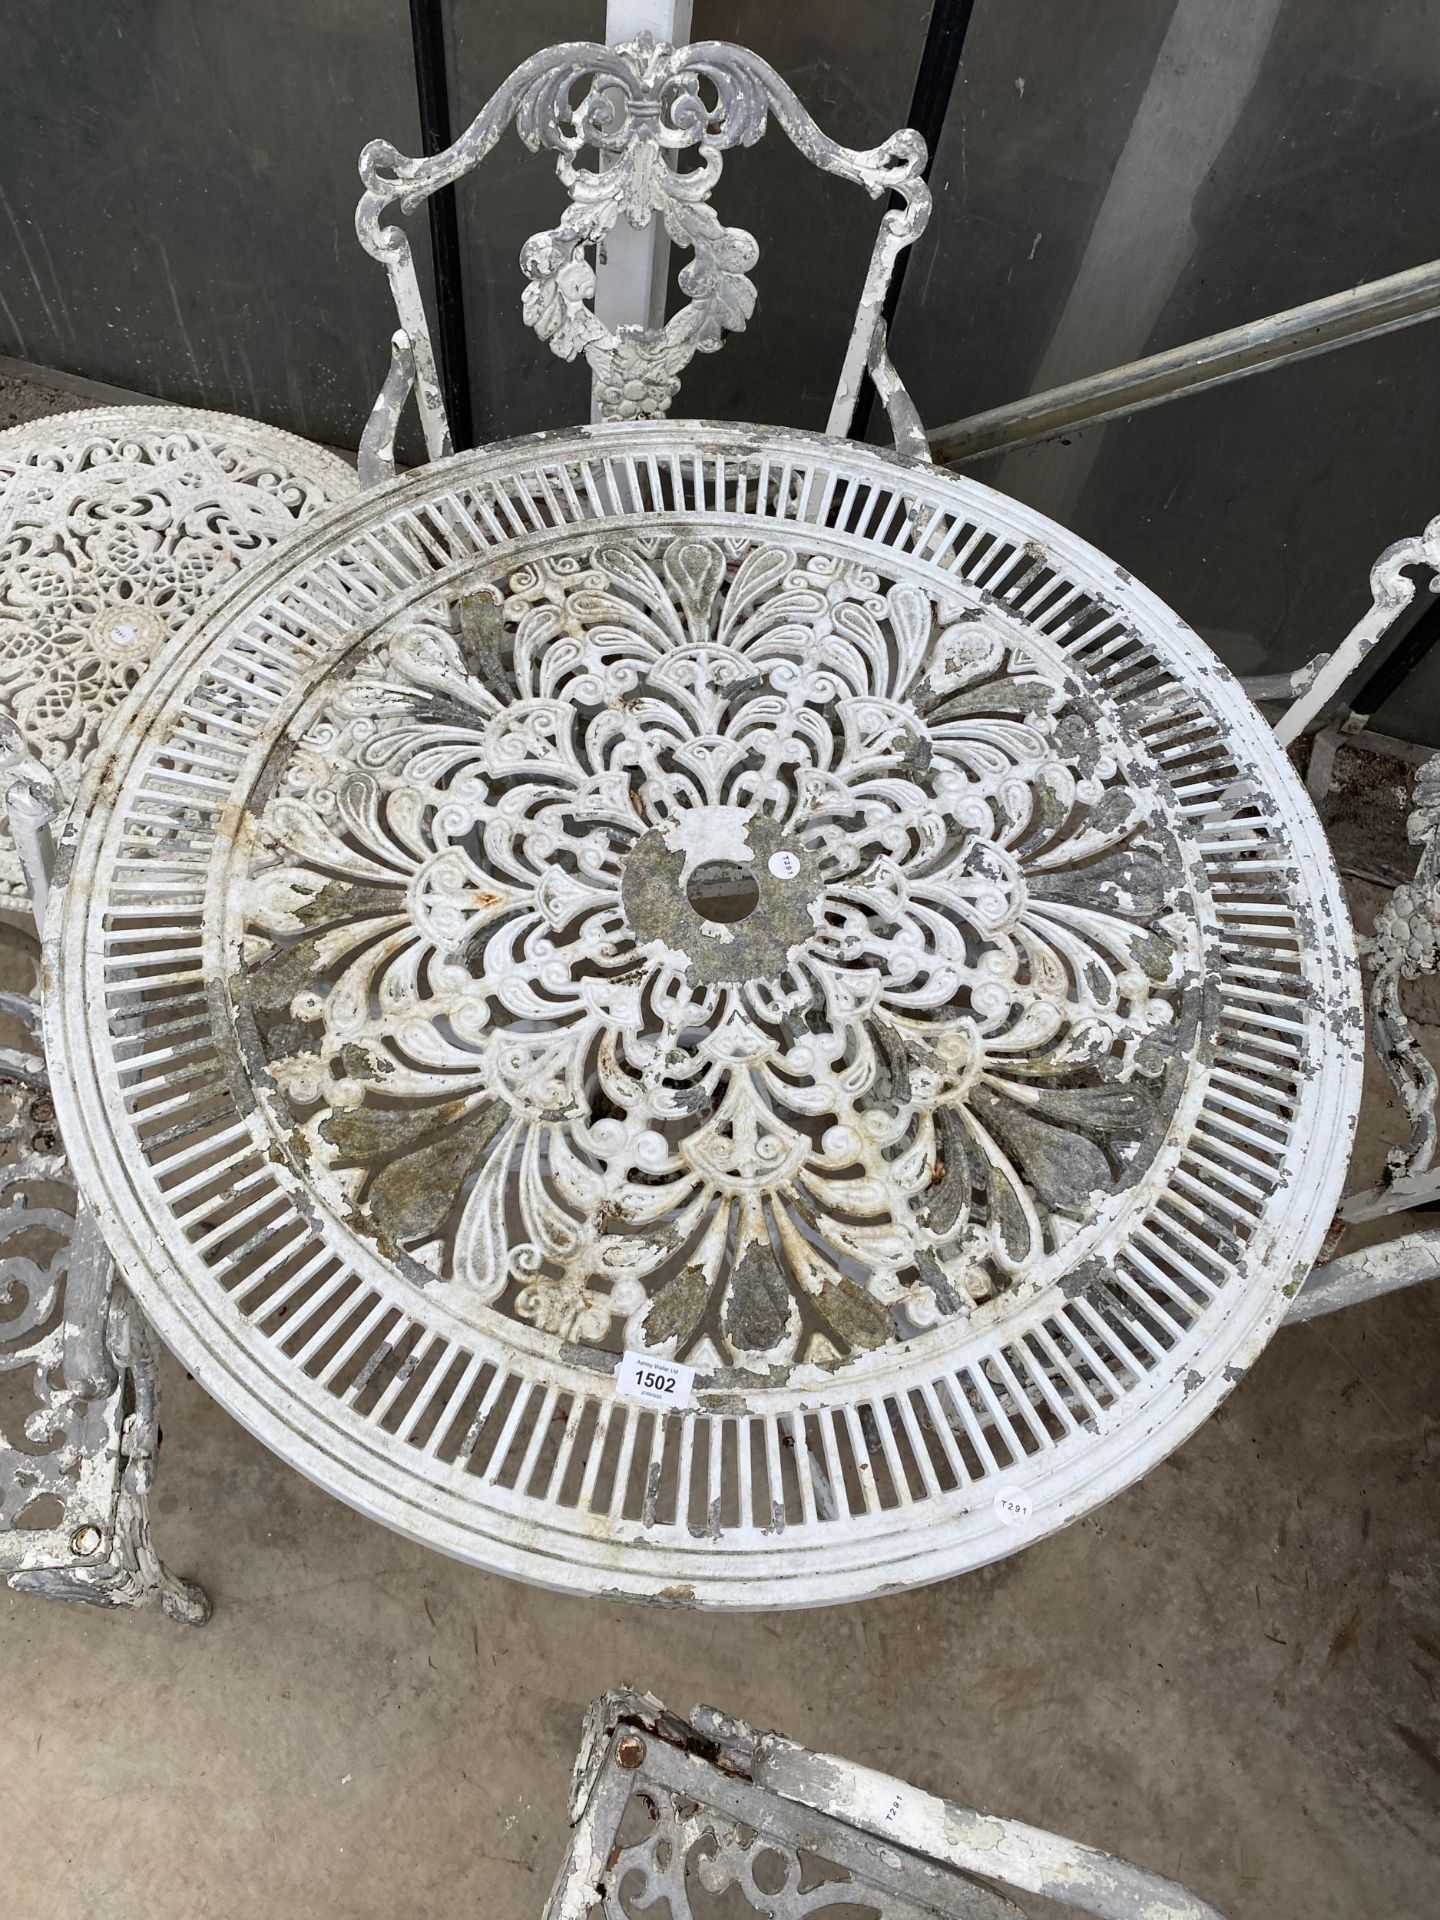 A VINTAGE CAST ALLOY BISTRO SET COMPRISING OF A ROUND TABLE, FOUR CARVER CHAIRS AND A COFFEE TABLE - Image 5 of 5